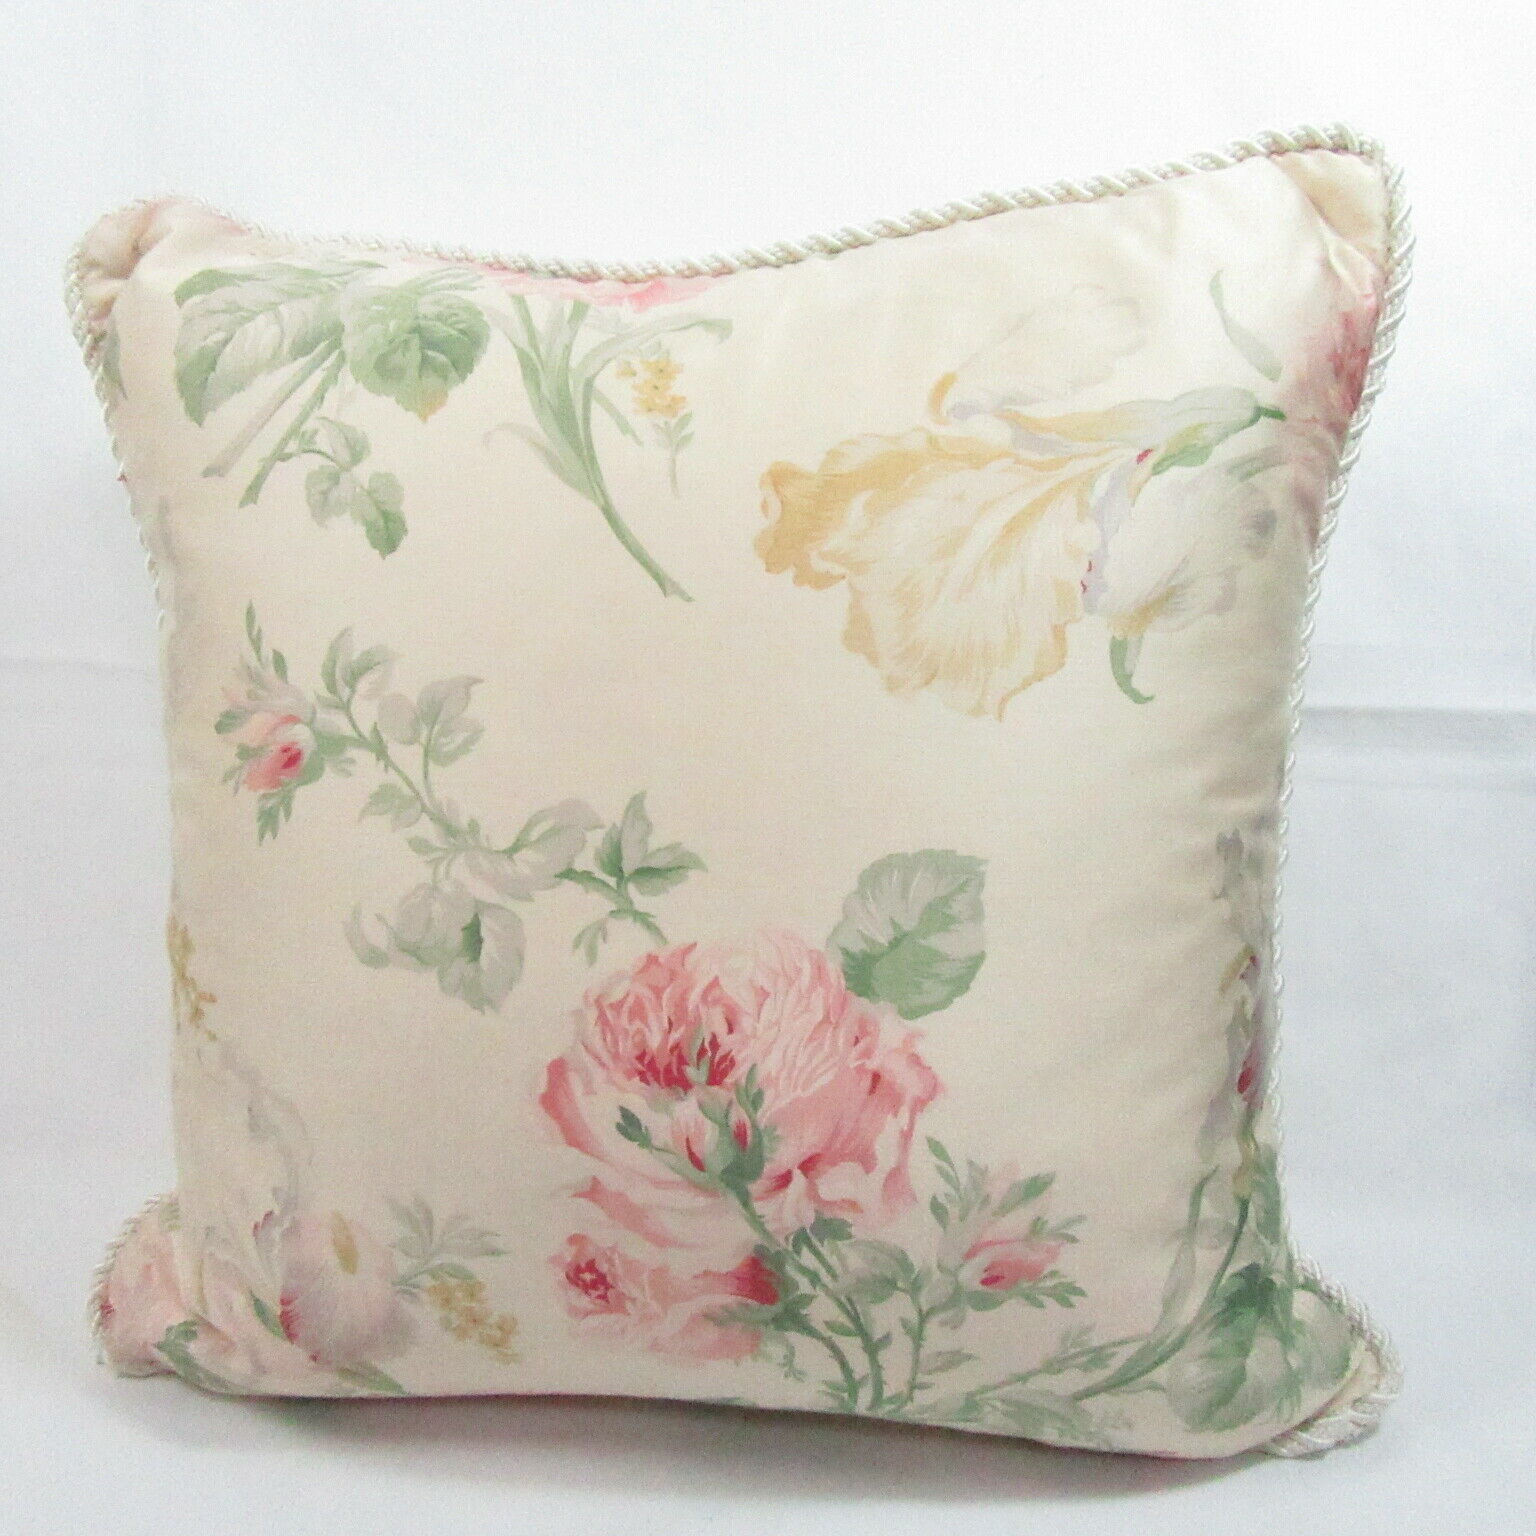 Ralph Lauren Therese Floral Pink Multi 16-inch Square Decorative Pillow - $49.00